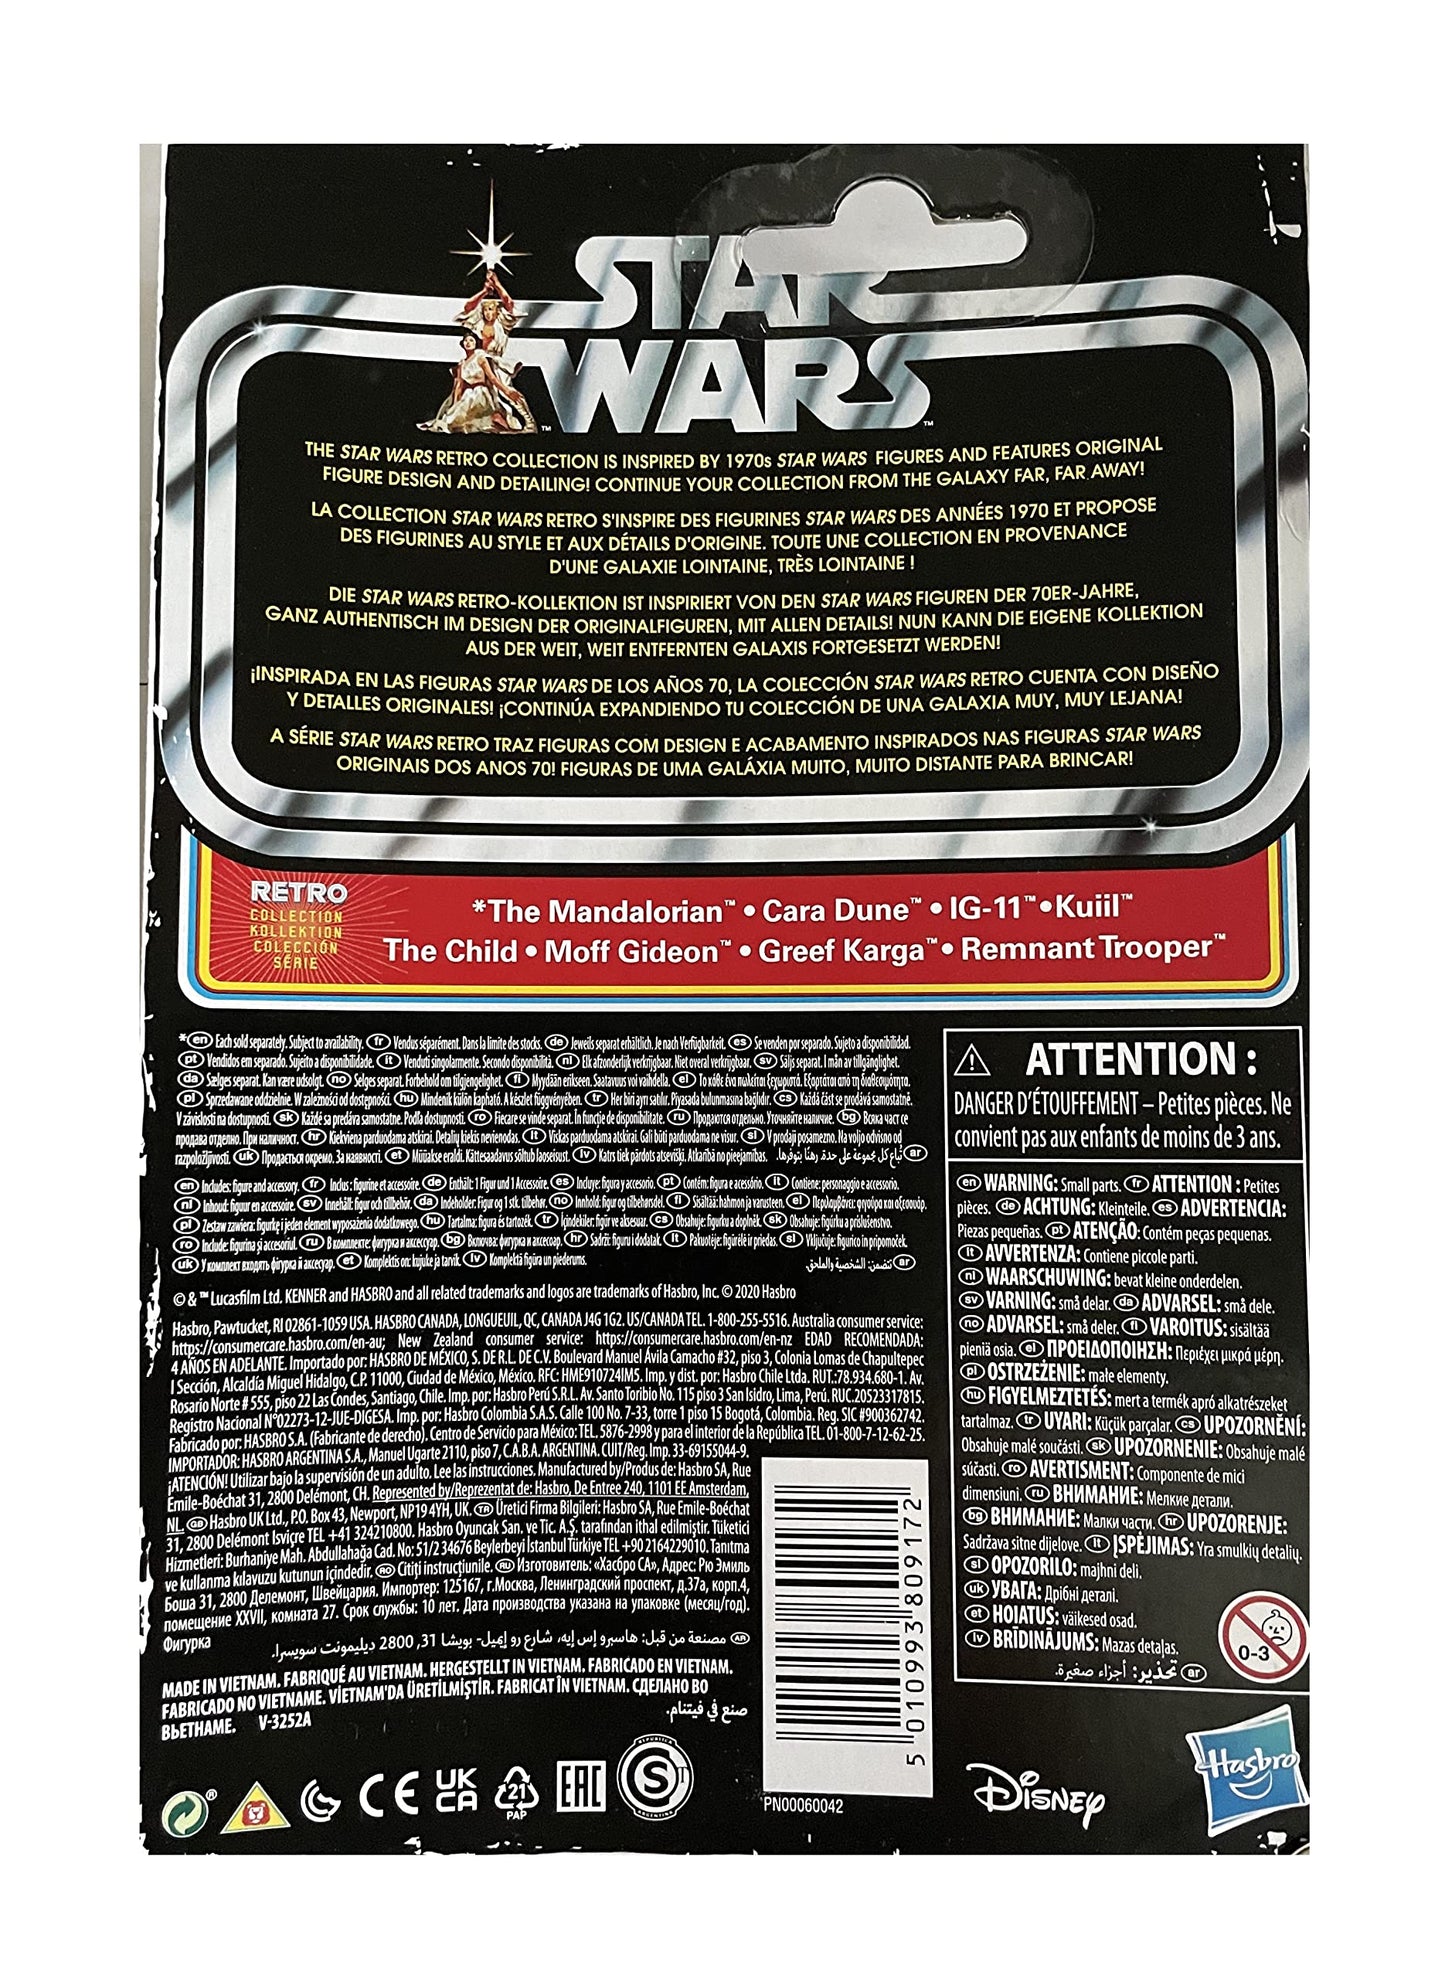 Star Wars Retro Collection - The Mandalorian - Greef Karga Action Figure With Blaster - Brand New Factory Sealed